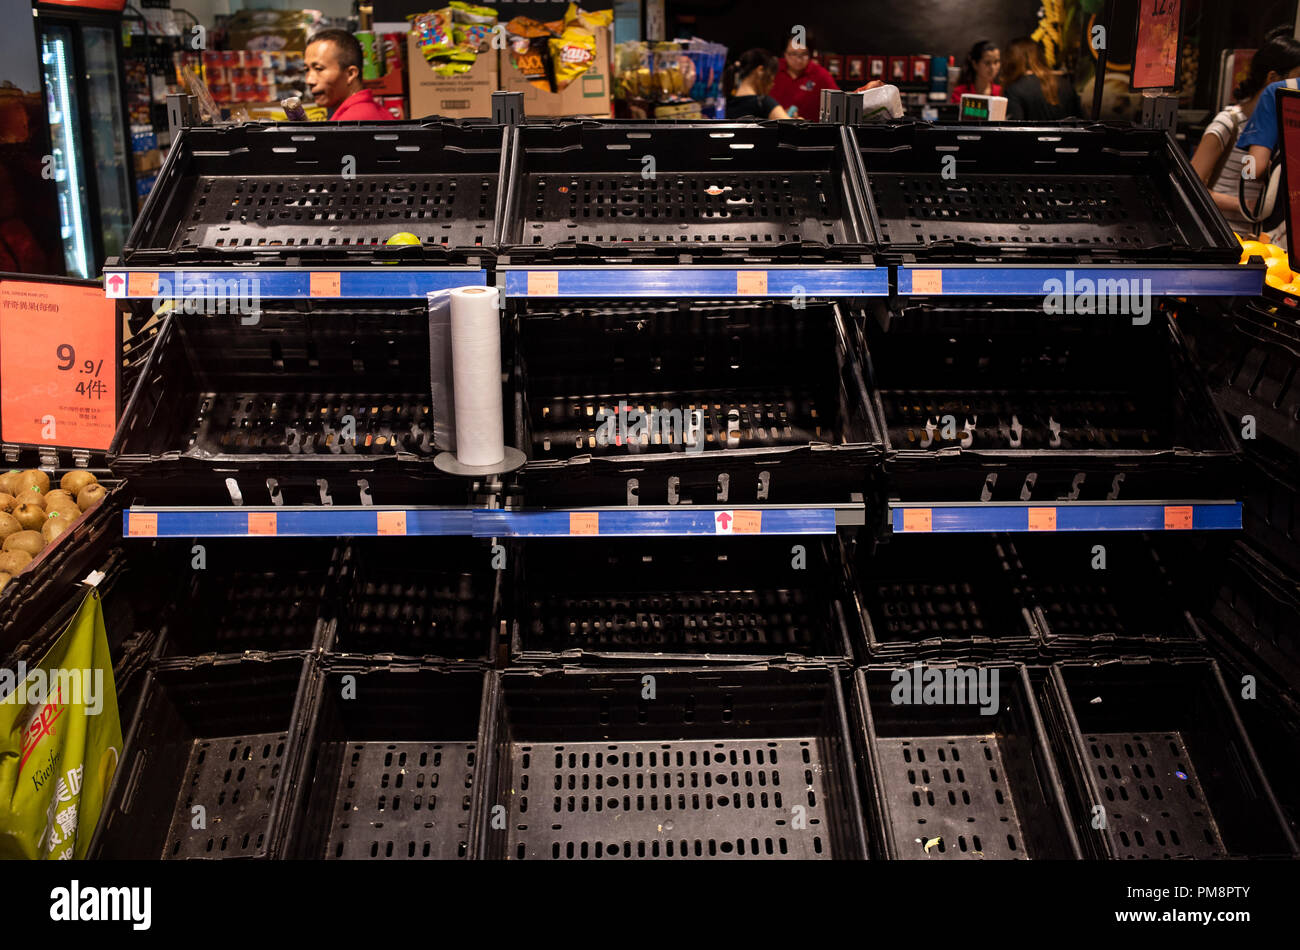 Empty Supermarket shelves as residents stock up ahead of Super Typhoon Mangkhut arrival in Hong Kong, China. It is expected to land with a typhoon signal No. 8. Stock Photo